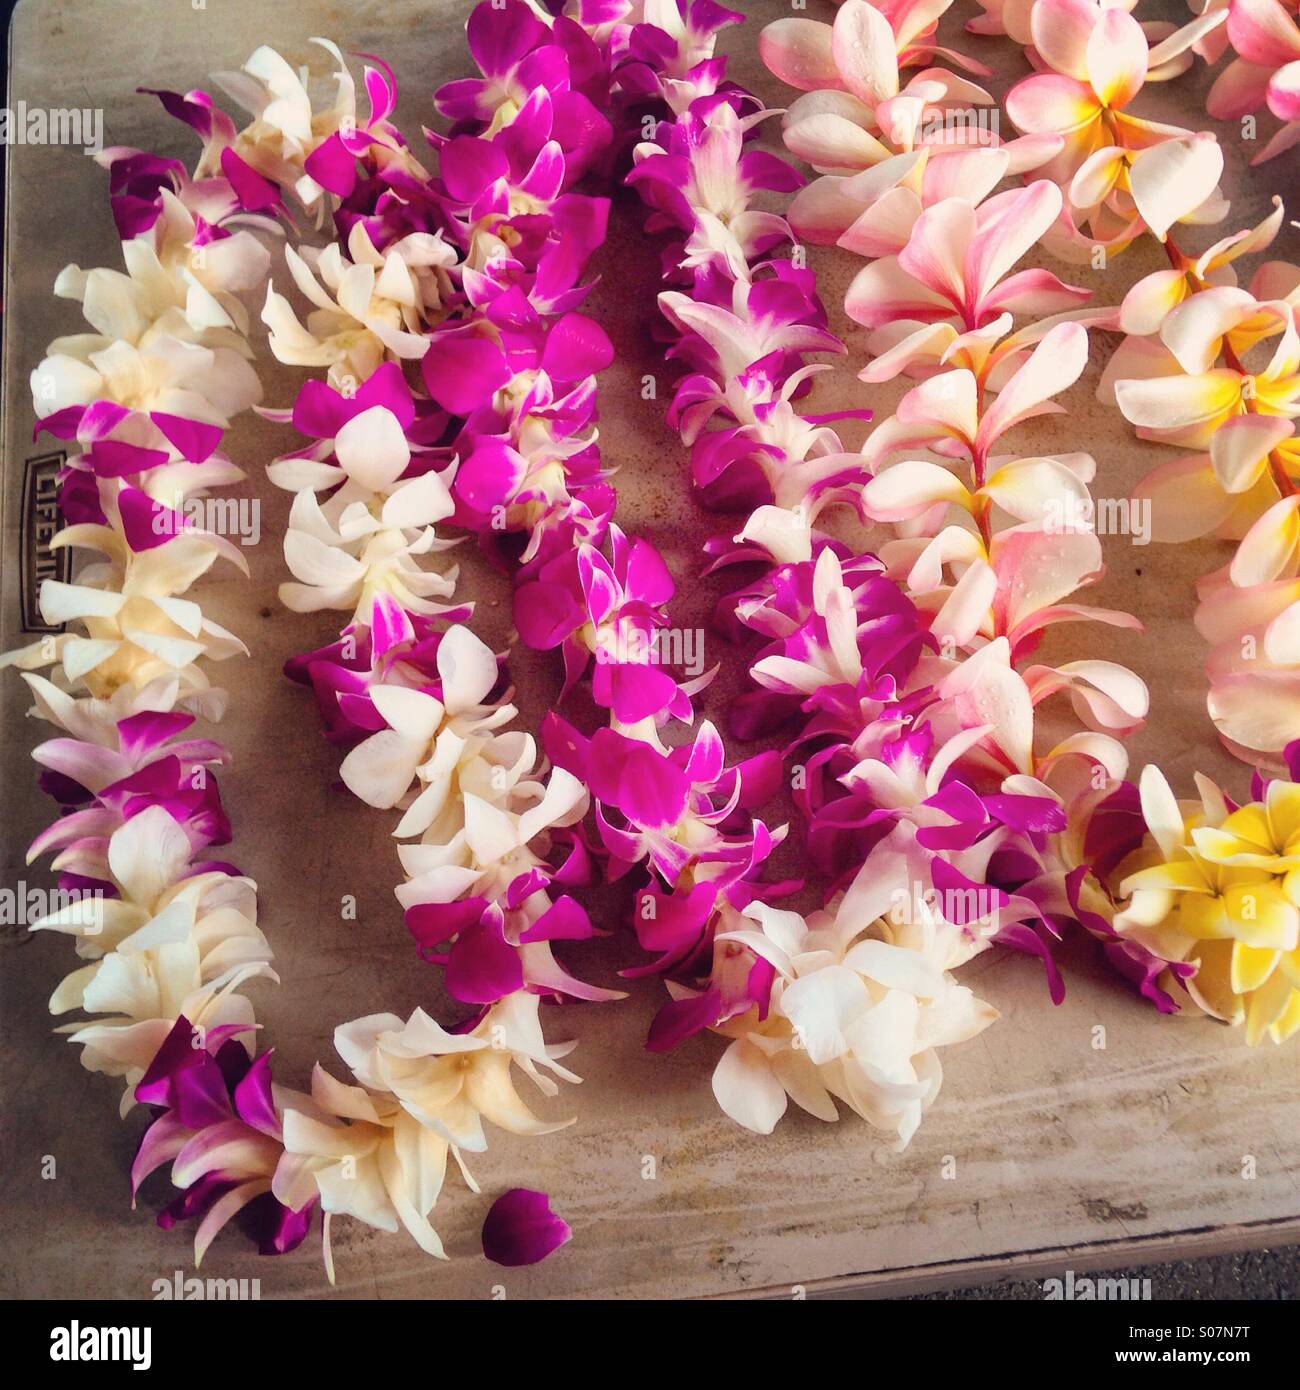 Leis of flowers, a cultural tradition in Hawaii Stock Photo